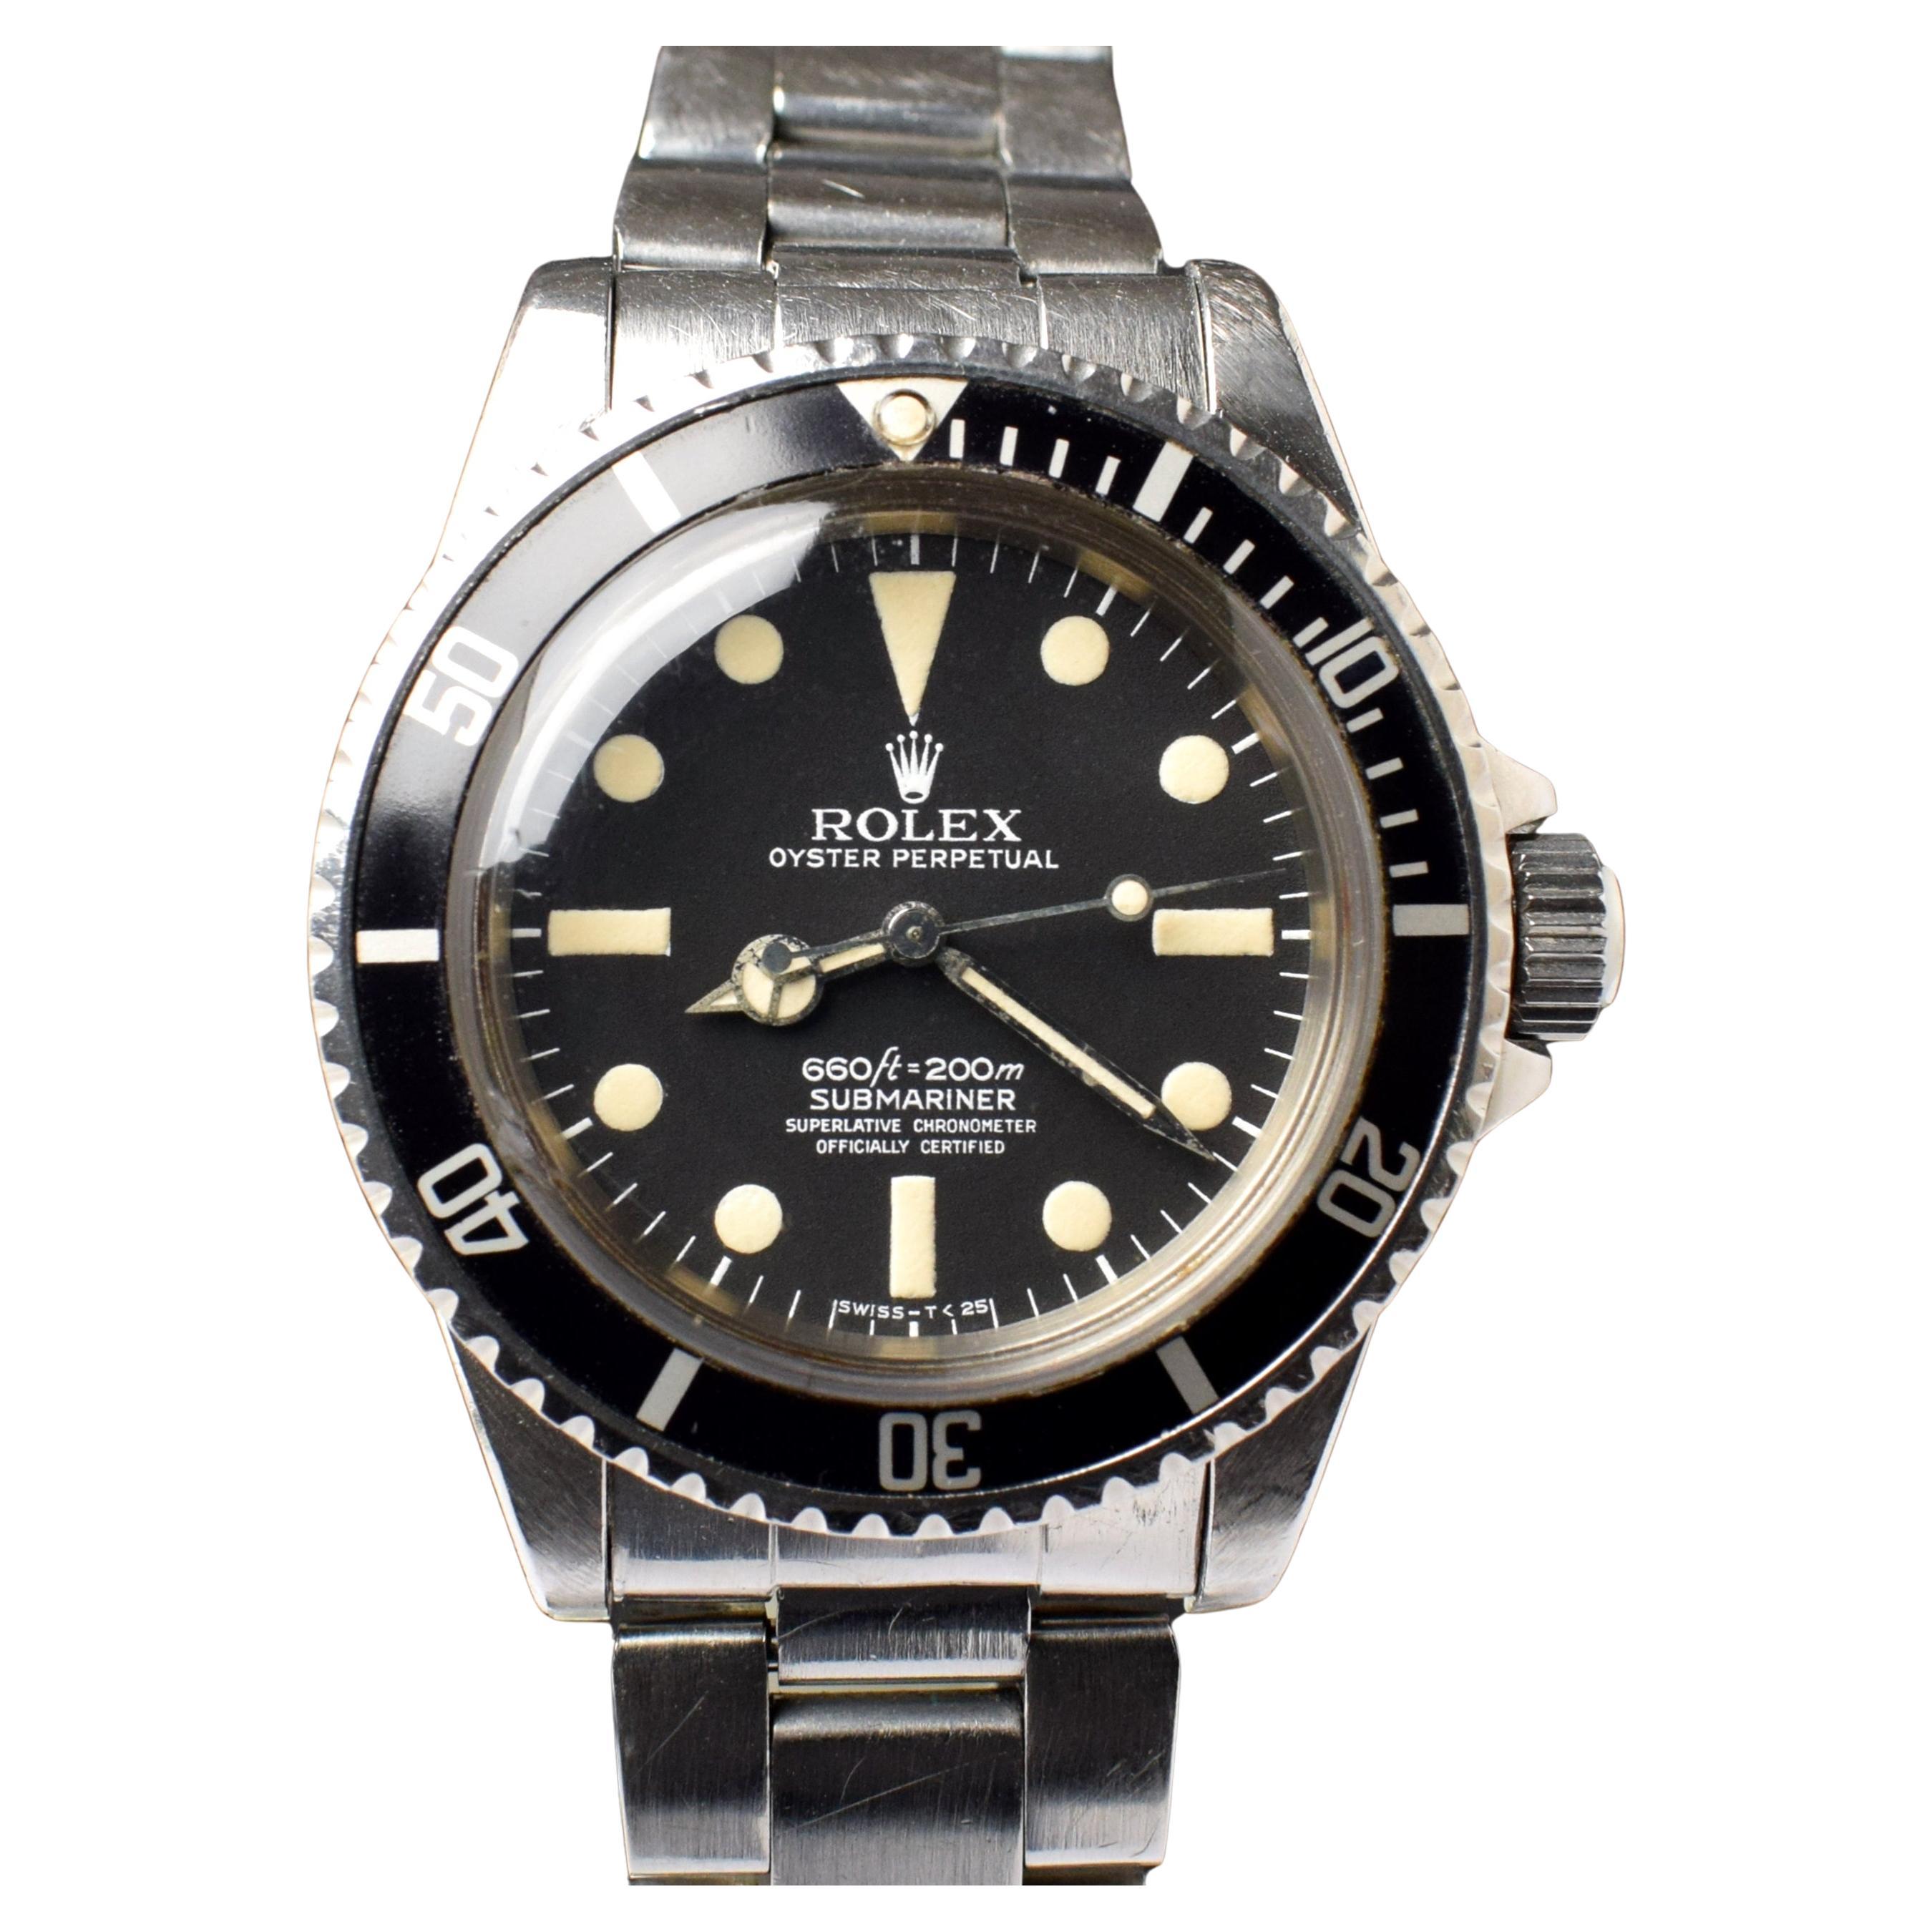 Rolex Submariner Matte Dial Maxi MK I 4 Lines 5512 Steel Automatic Watch 1977